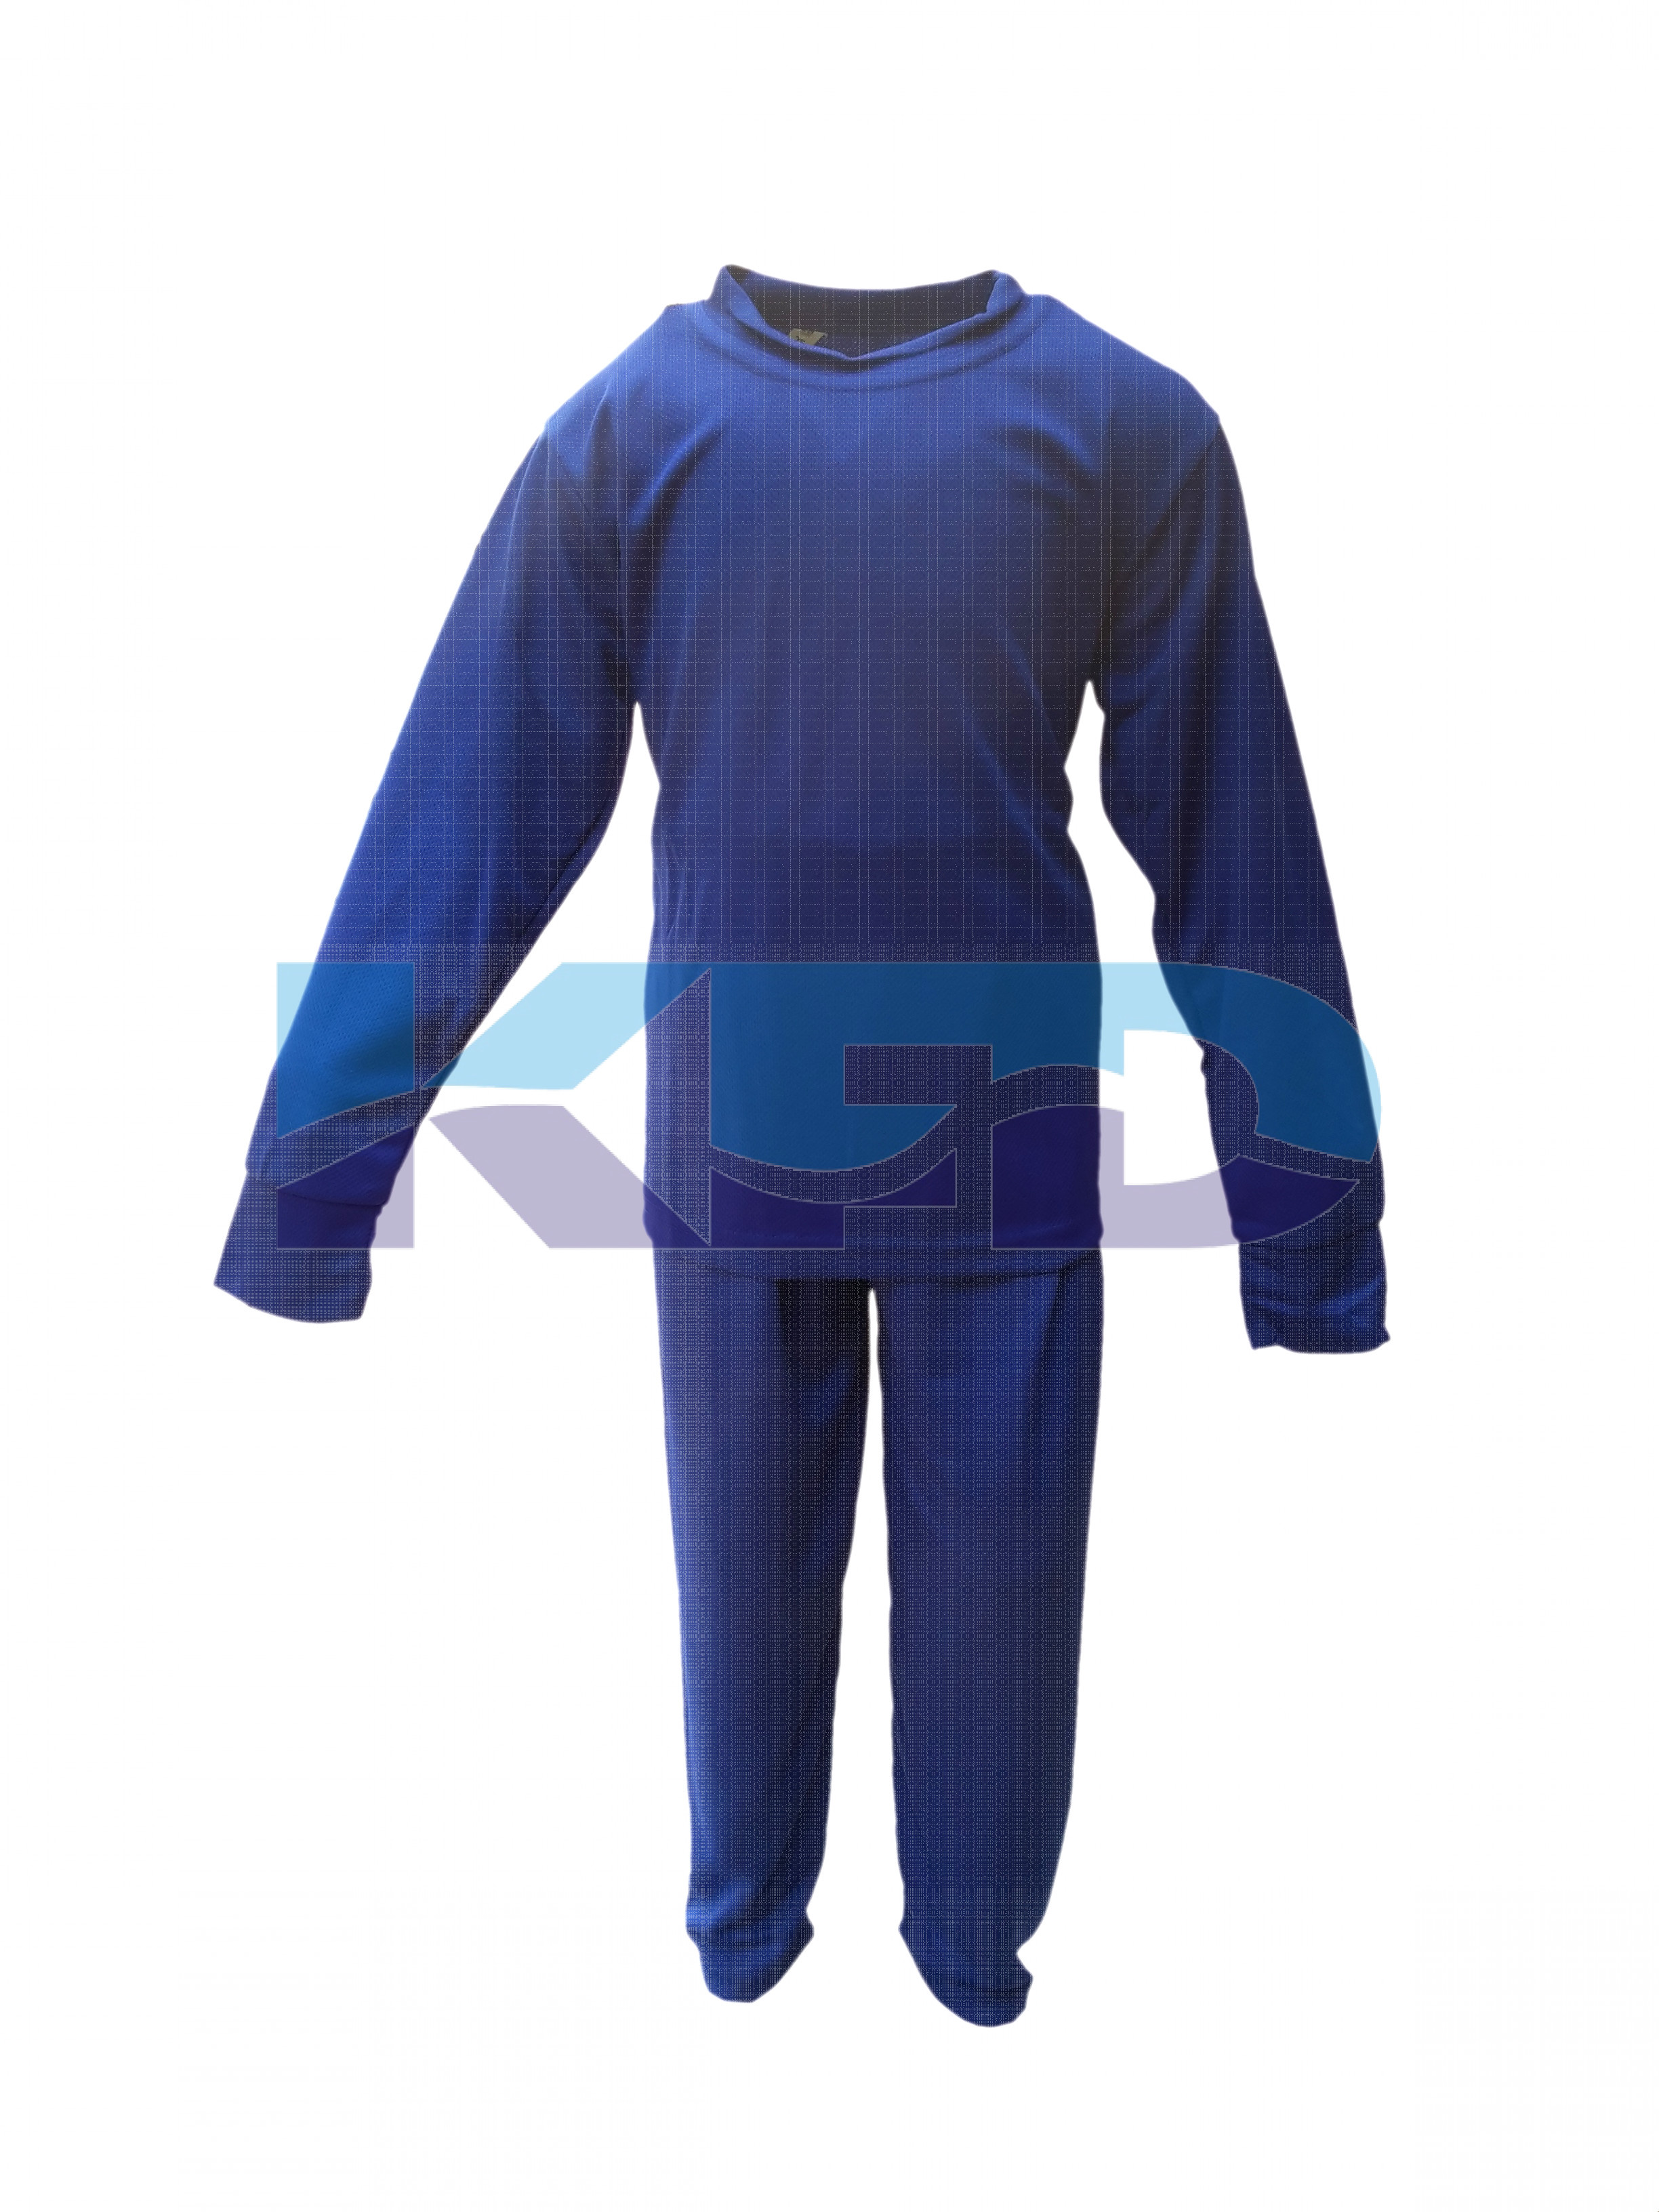 Track Suite Blue Color fancy dress for kids,Costume for School Annual function/Theme Party/Competition/Stage Shows/Birthday Party Dress